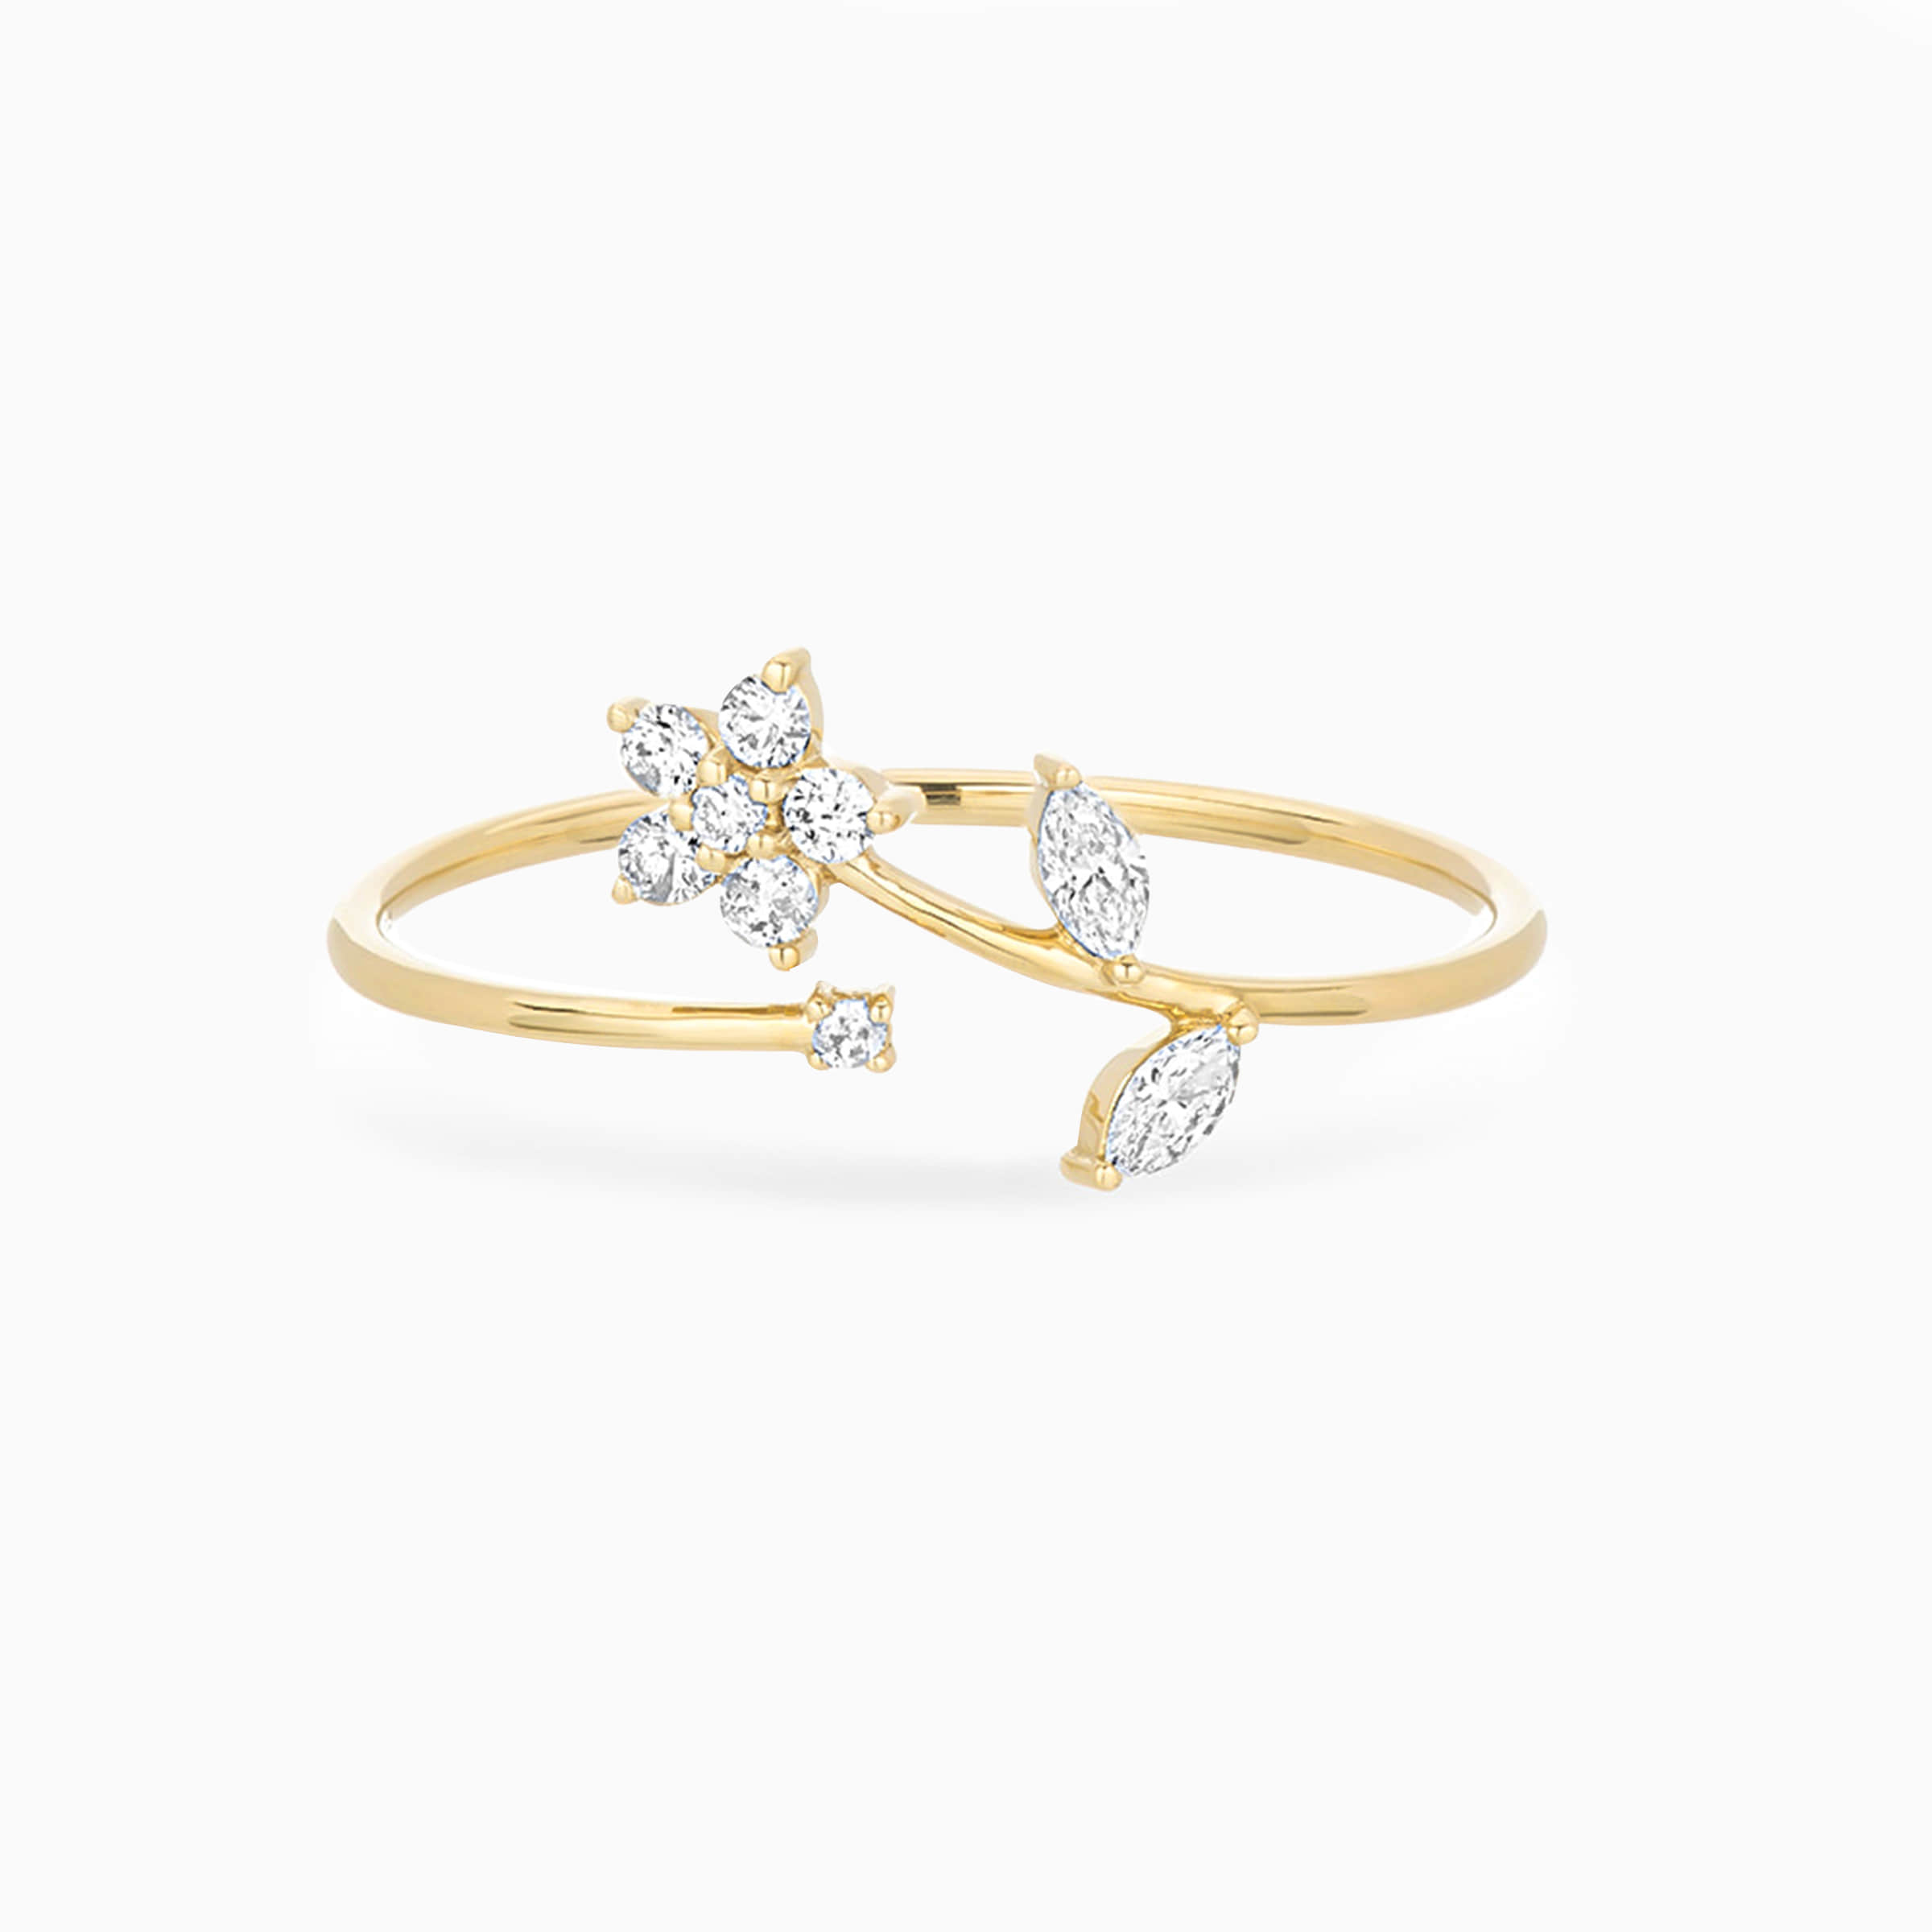 Darry Ring unique promise ring in yellow gold